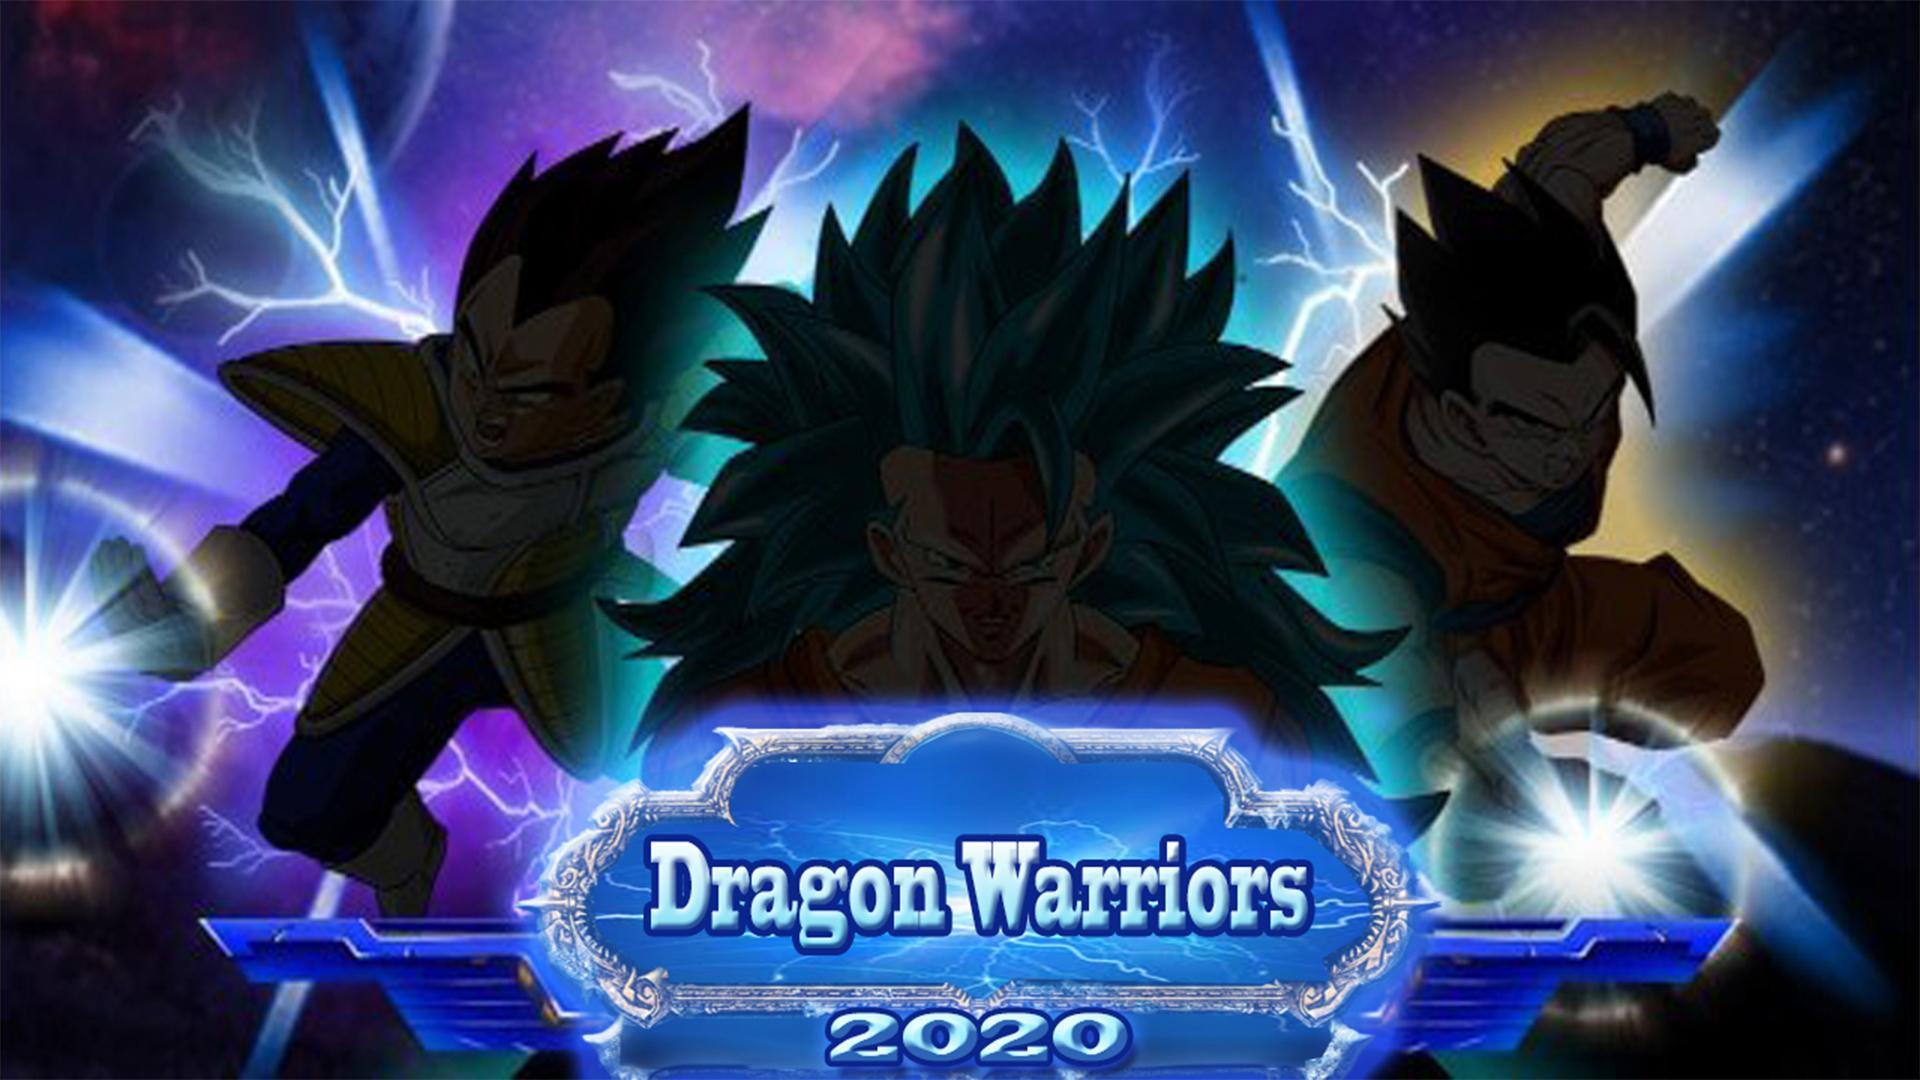 Super Dragon Shadow Fight APK Download for Android Free